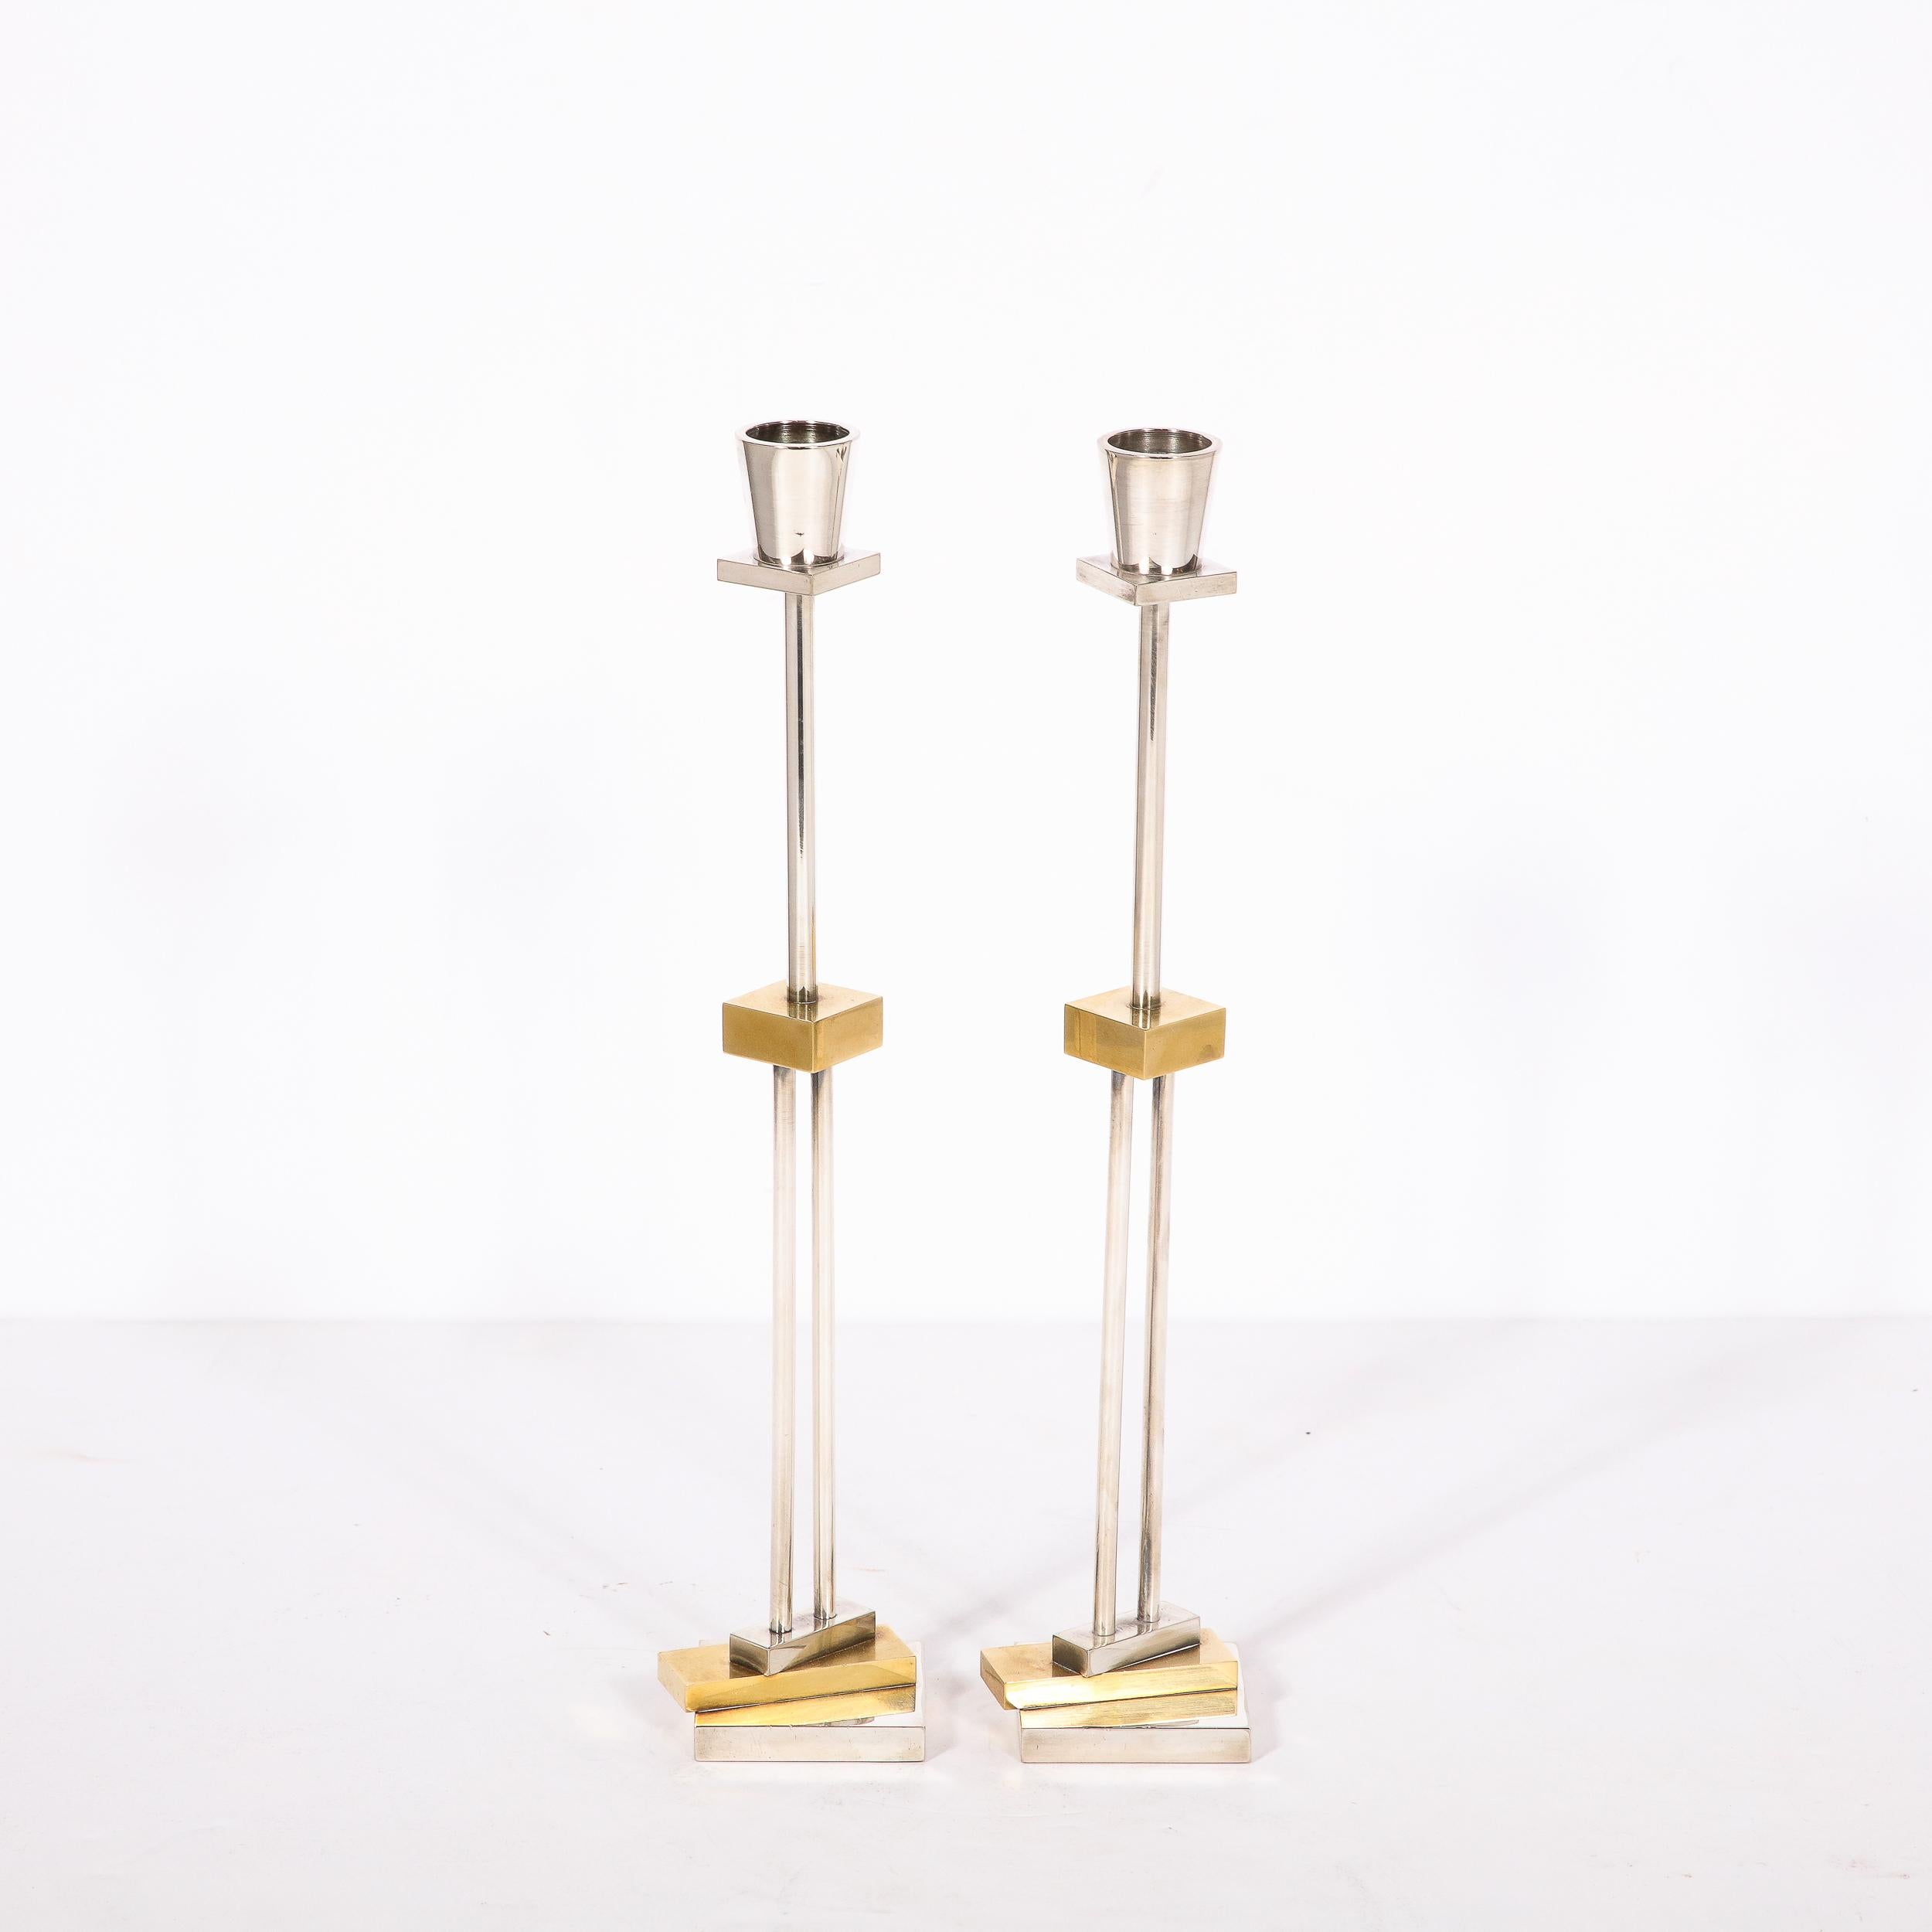 This stunning pair of post modernist candlesticks were realized by the iconoclastic and inimitable Ettore Sottsass for Swid Powell. These pieces feature a volumetric square silverplated base stacked with a brass rectangular panel at a biased angle